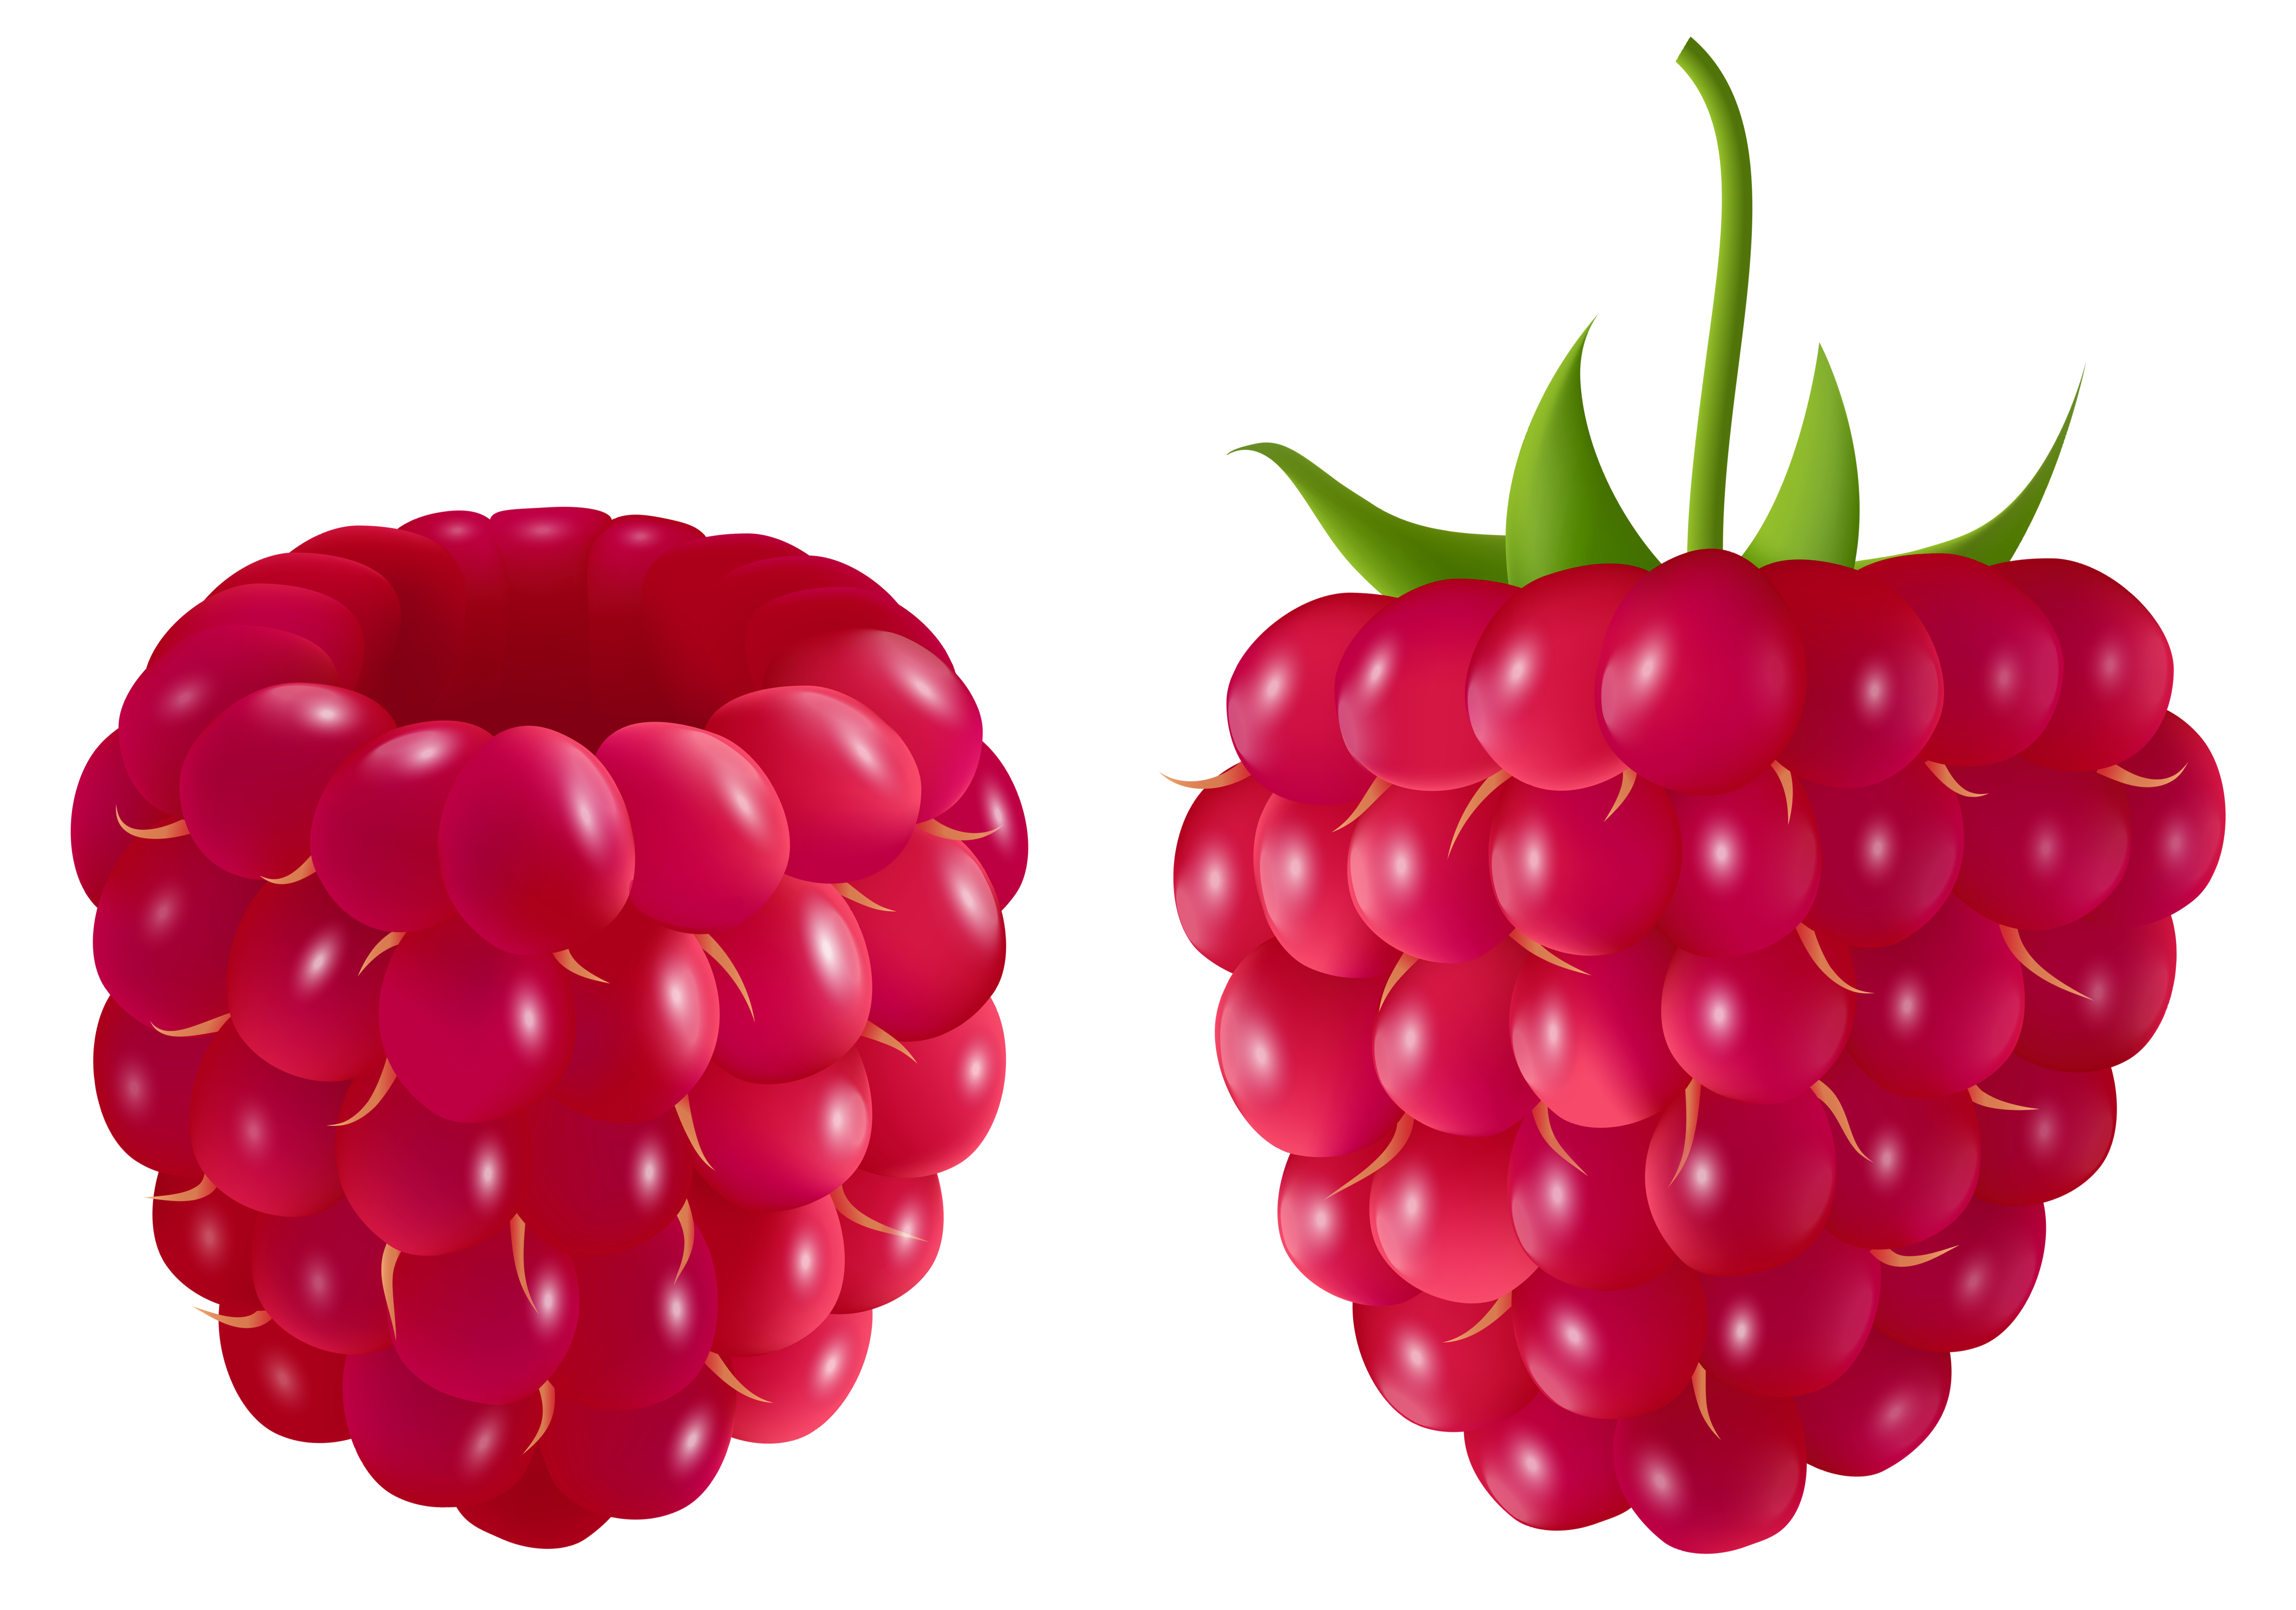 Transparent Raspberry PNG Clipart Picture